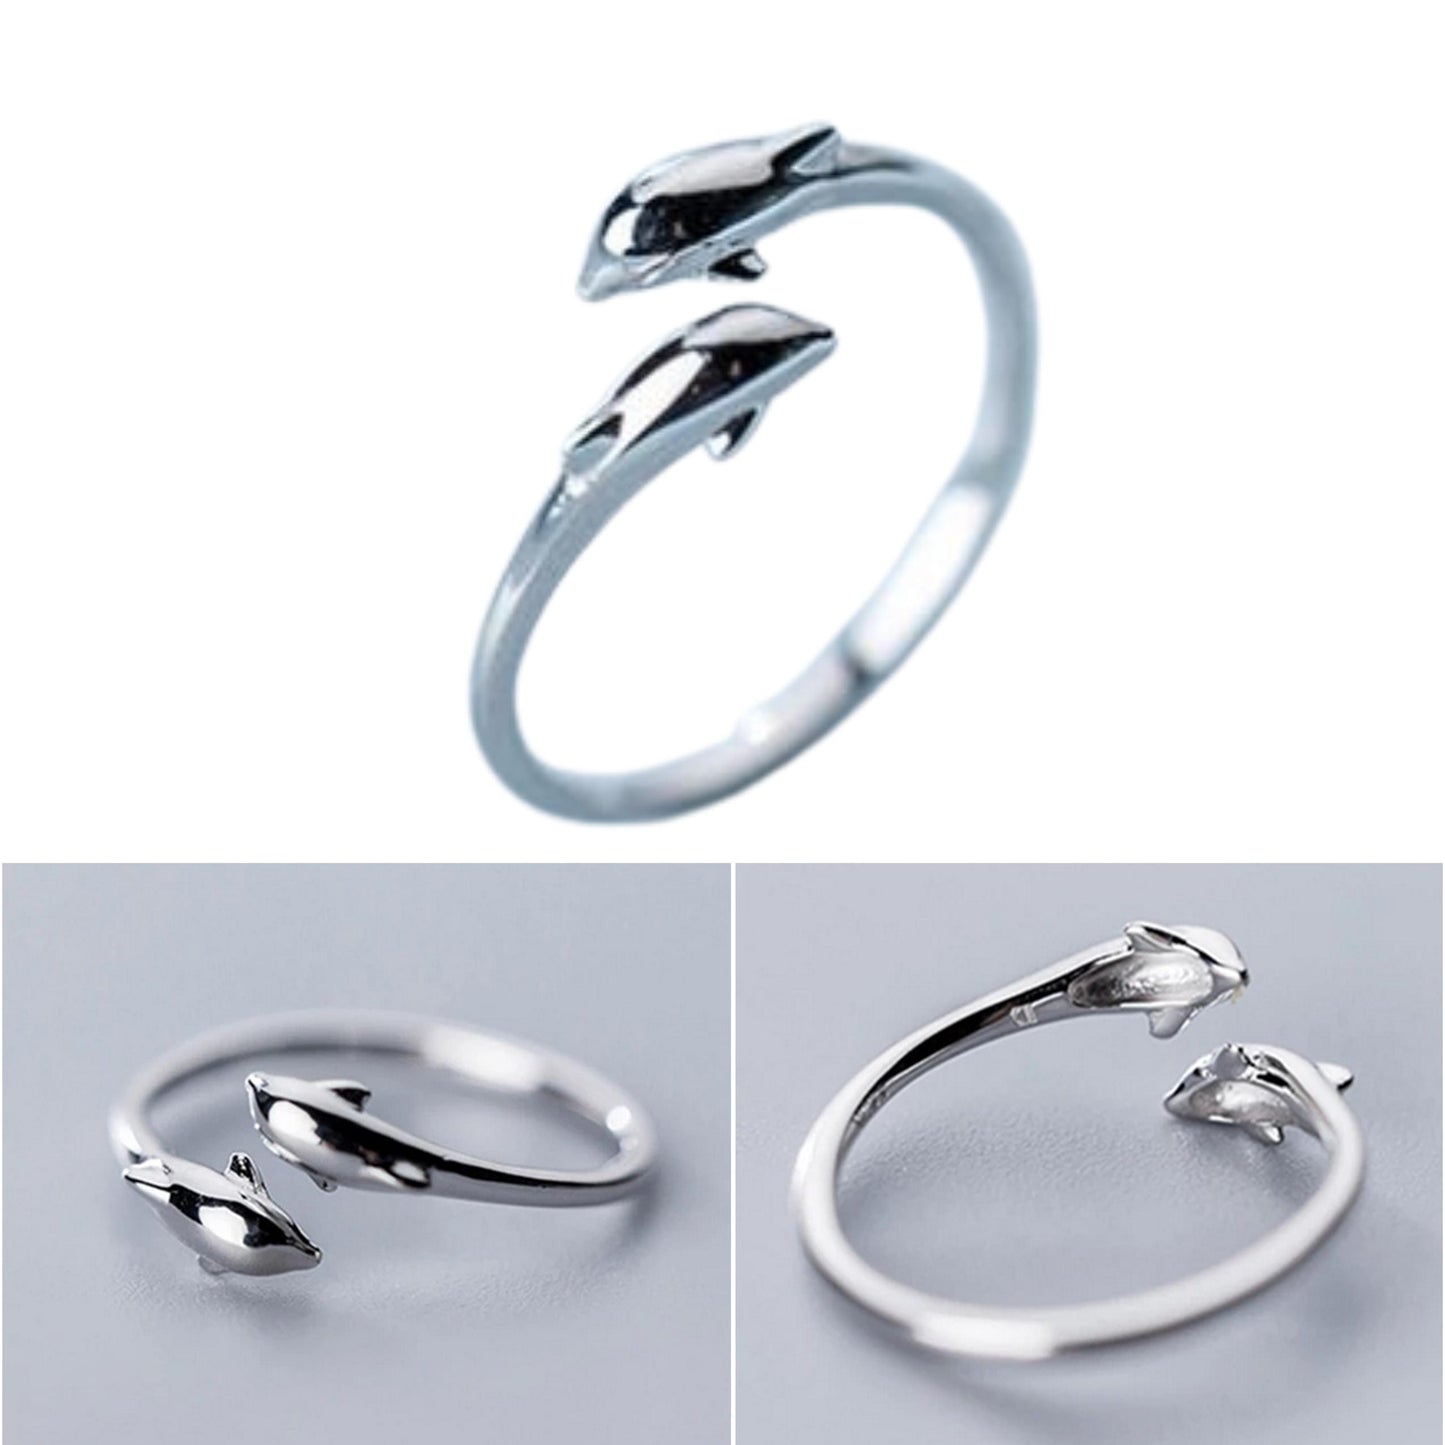 Dolphin JOY Empowerment Adjustable Ring - Silver - Cheer and Dance On Demand